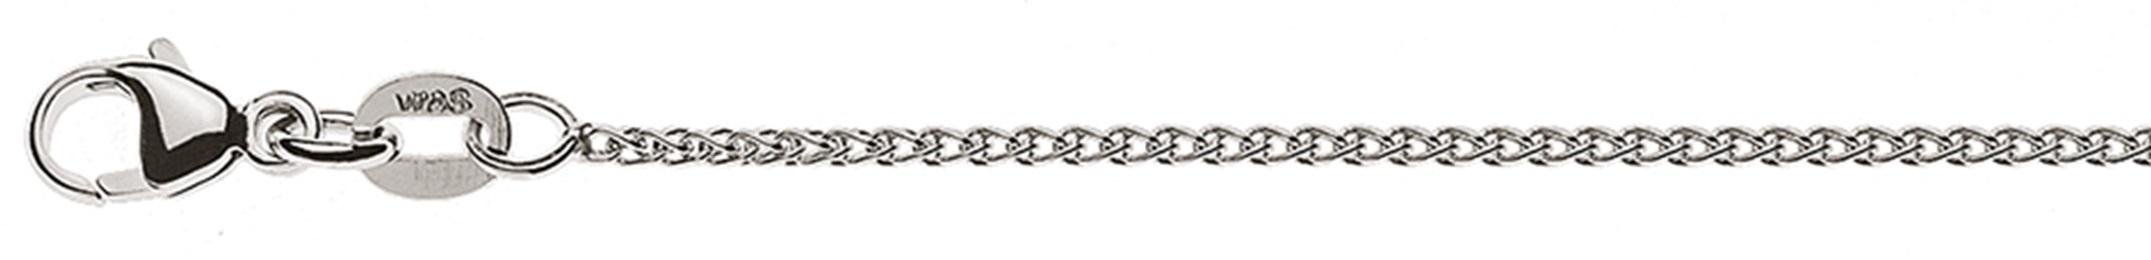 AURONOS Style Necklace white gold 9K cable chain 42cm 1.2mm